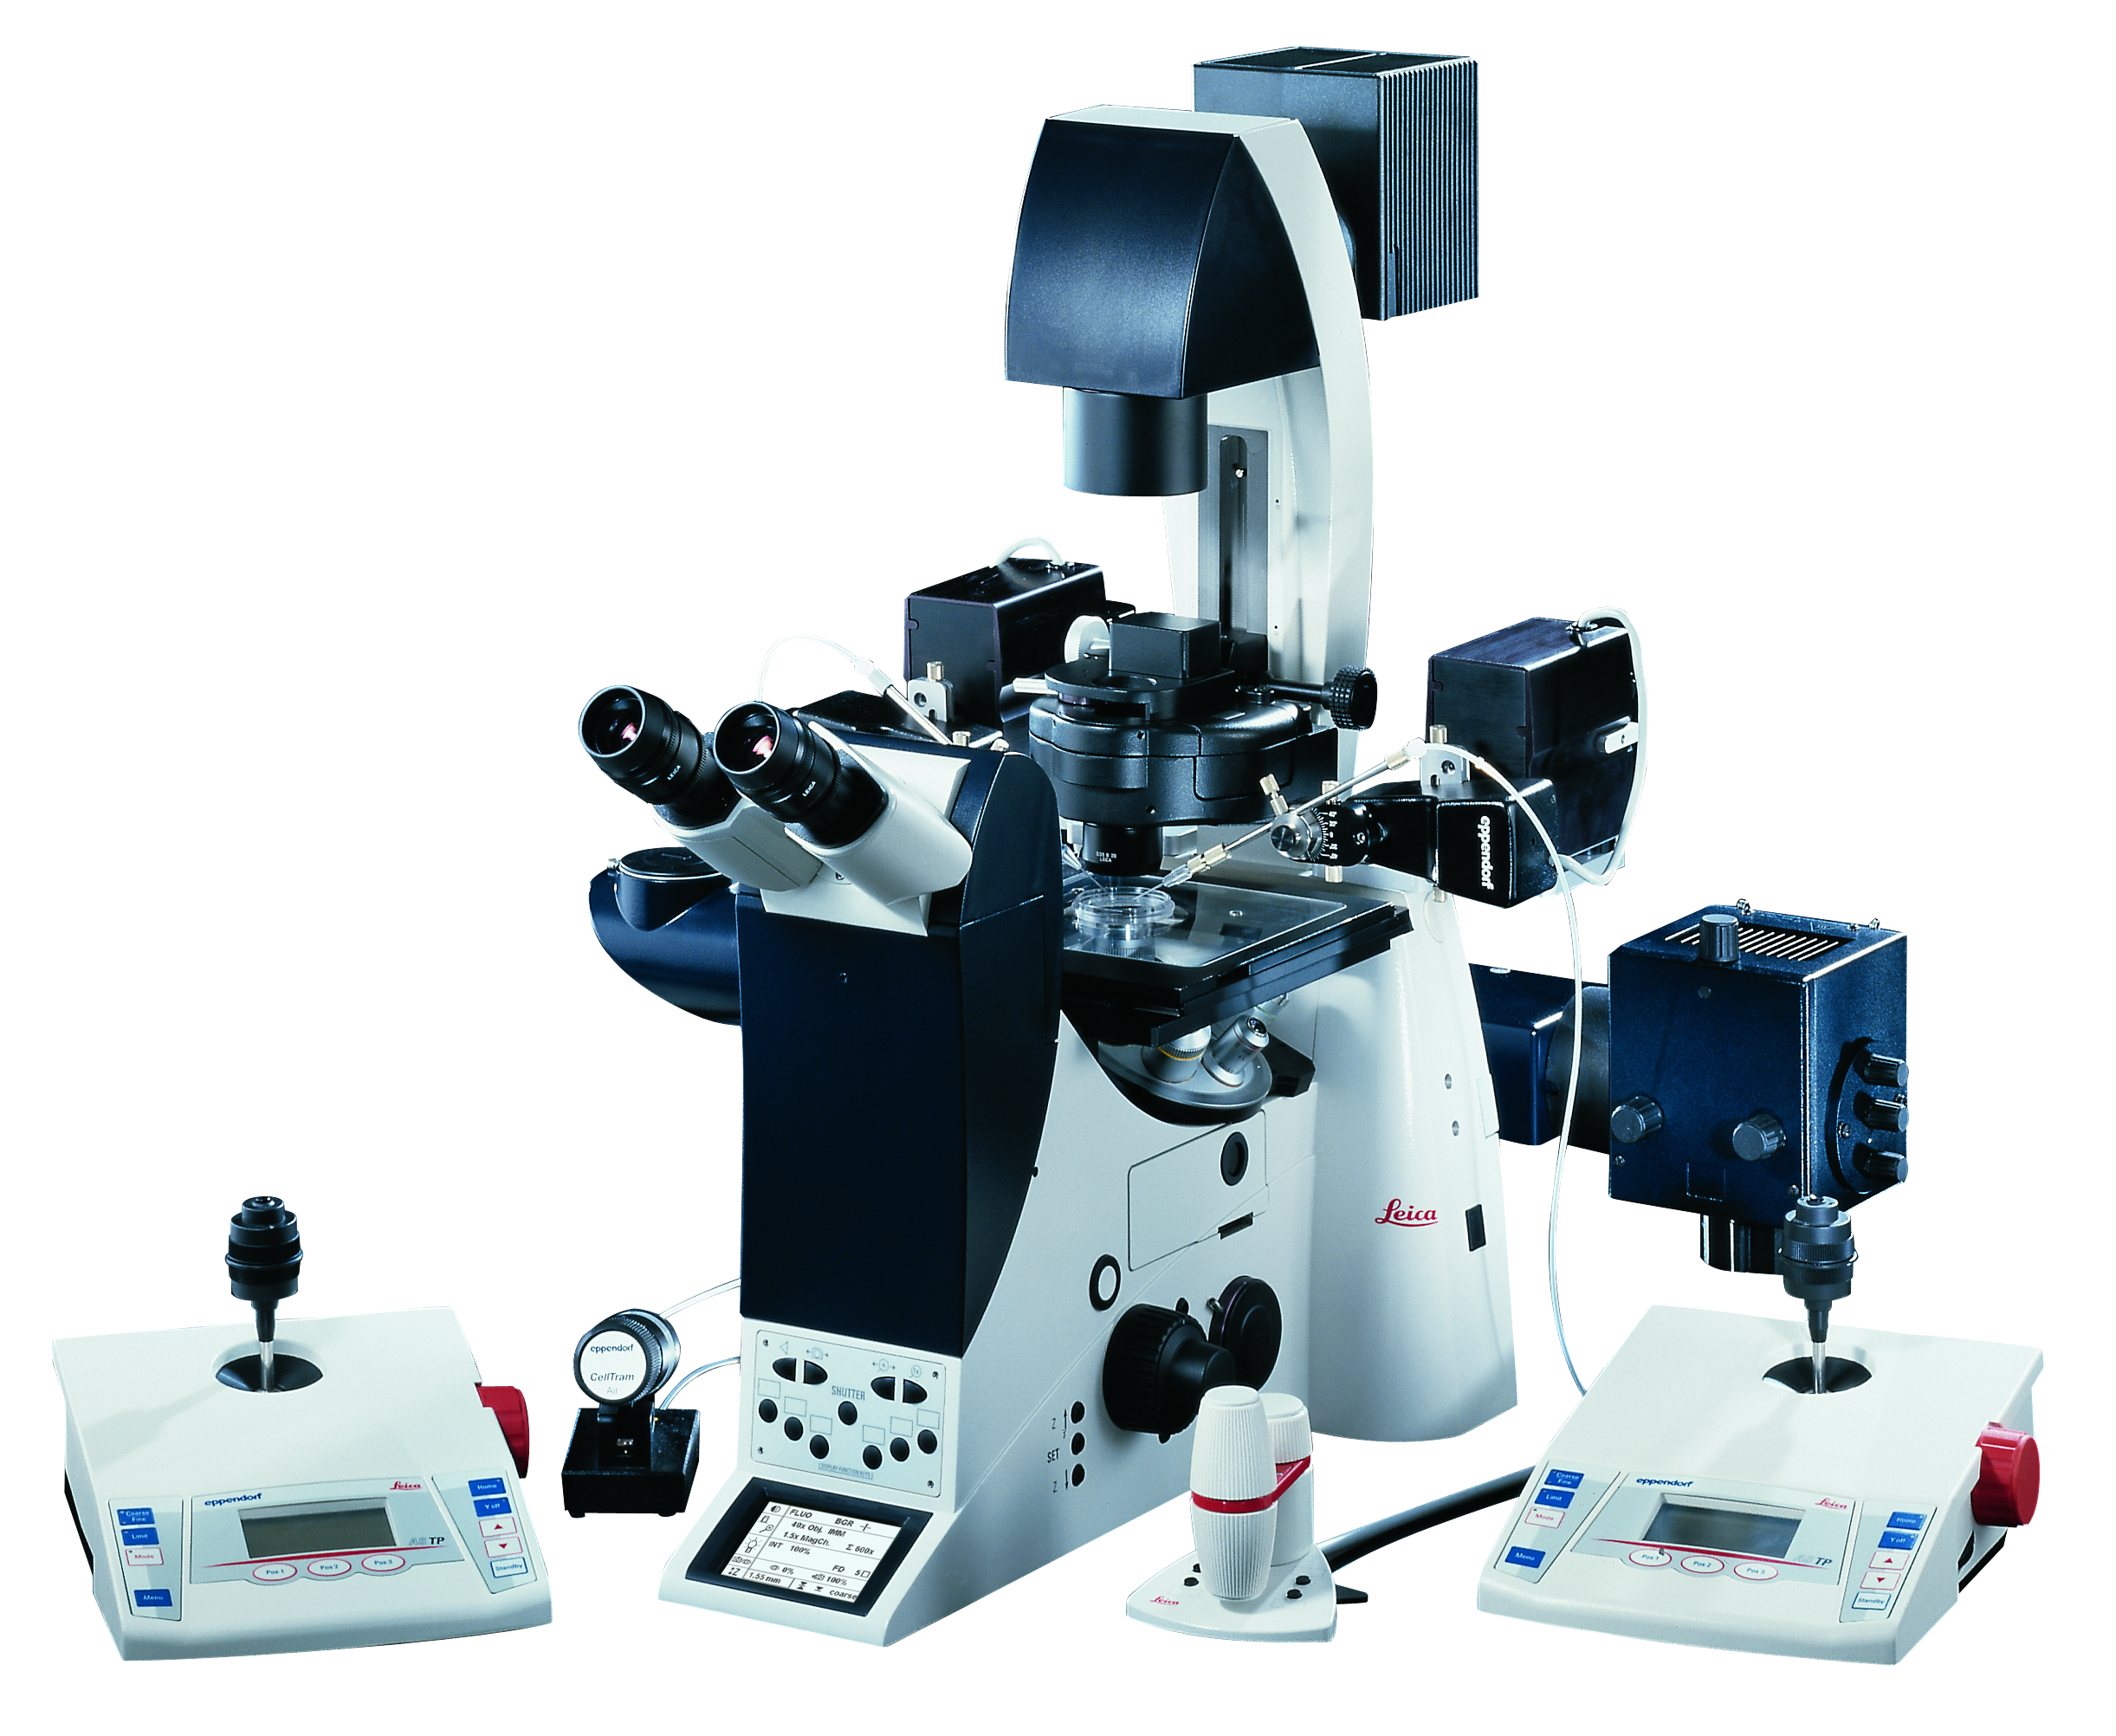 The Leica AM6000 automates and speeds up  micromanipulation workflow.